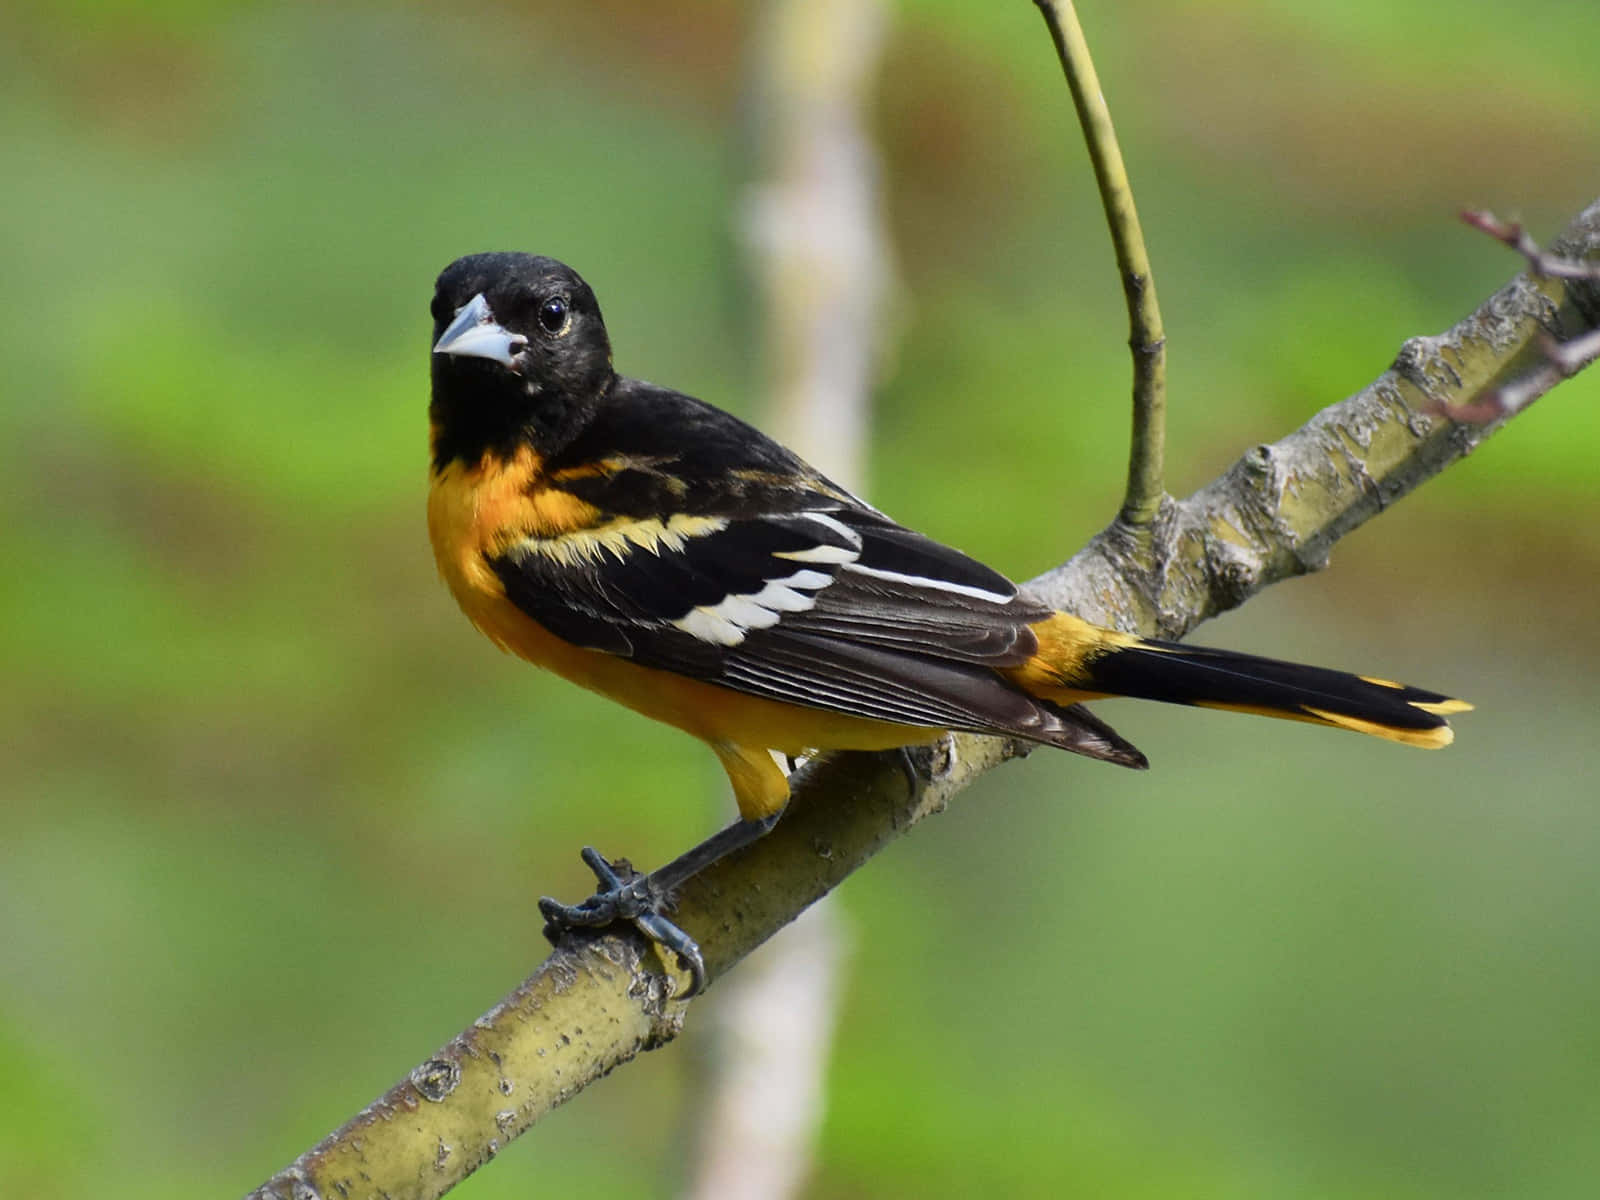 A Black And Orange Bird Is Sitting On A Branch